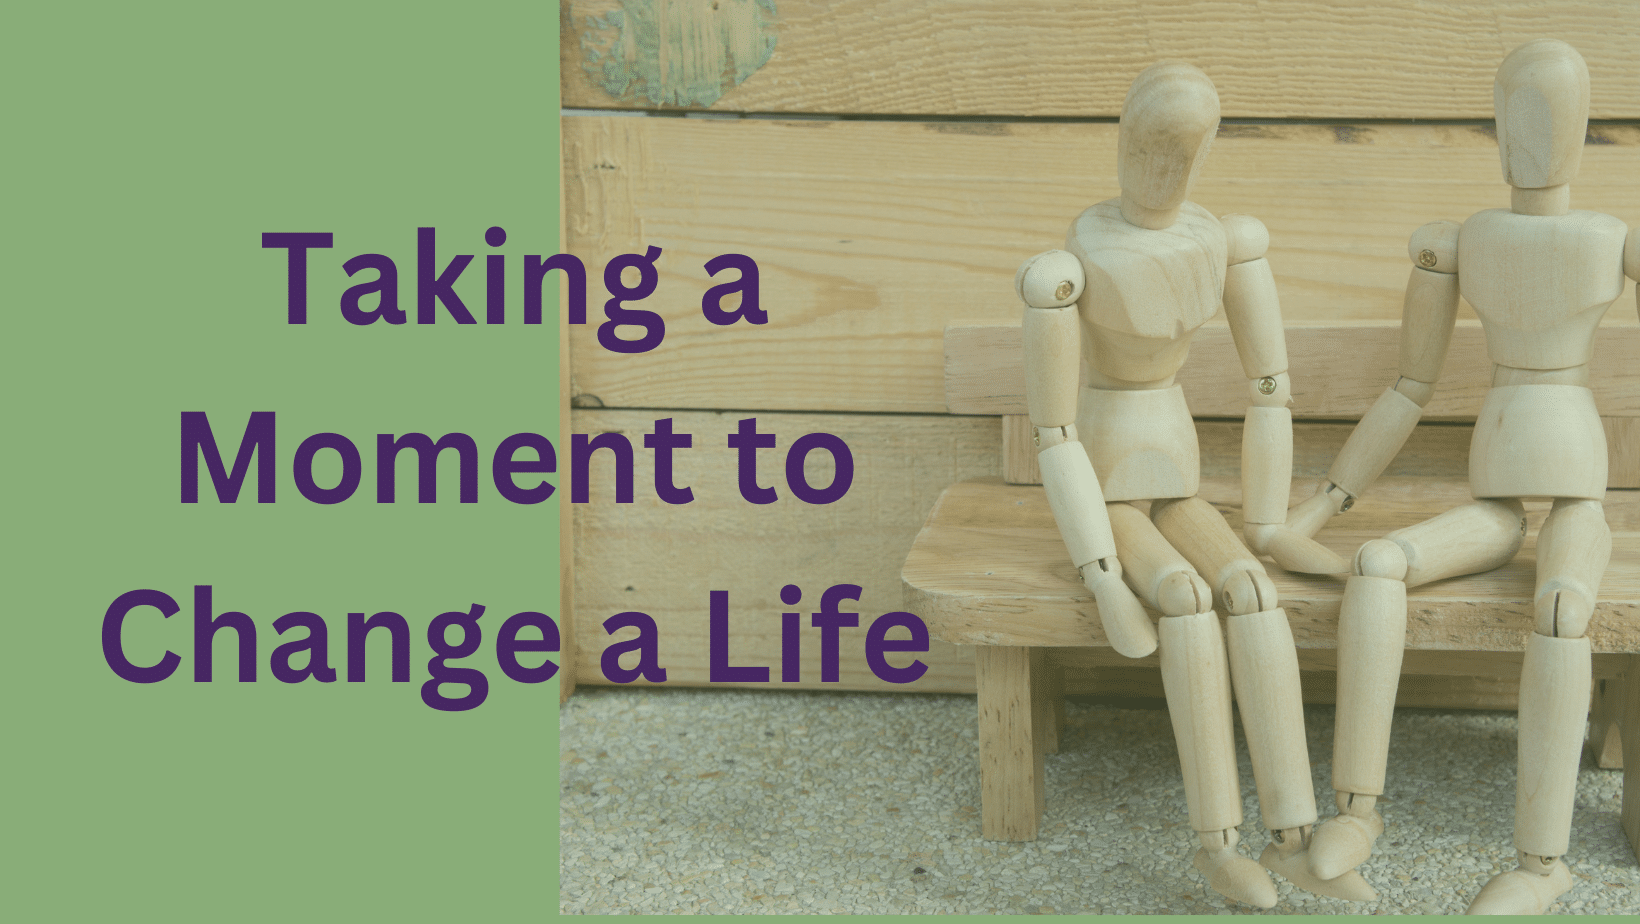 Featured image for “Taking a Moment to Change a Life”